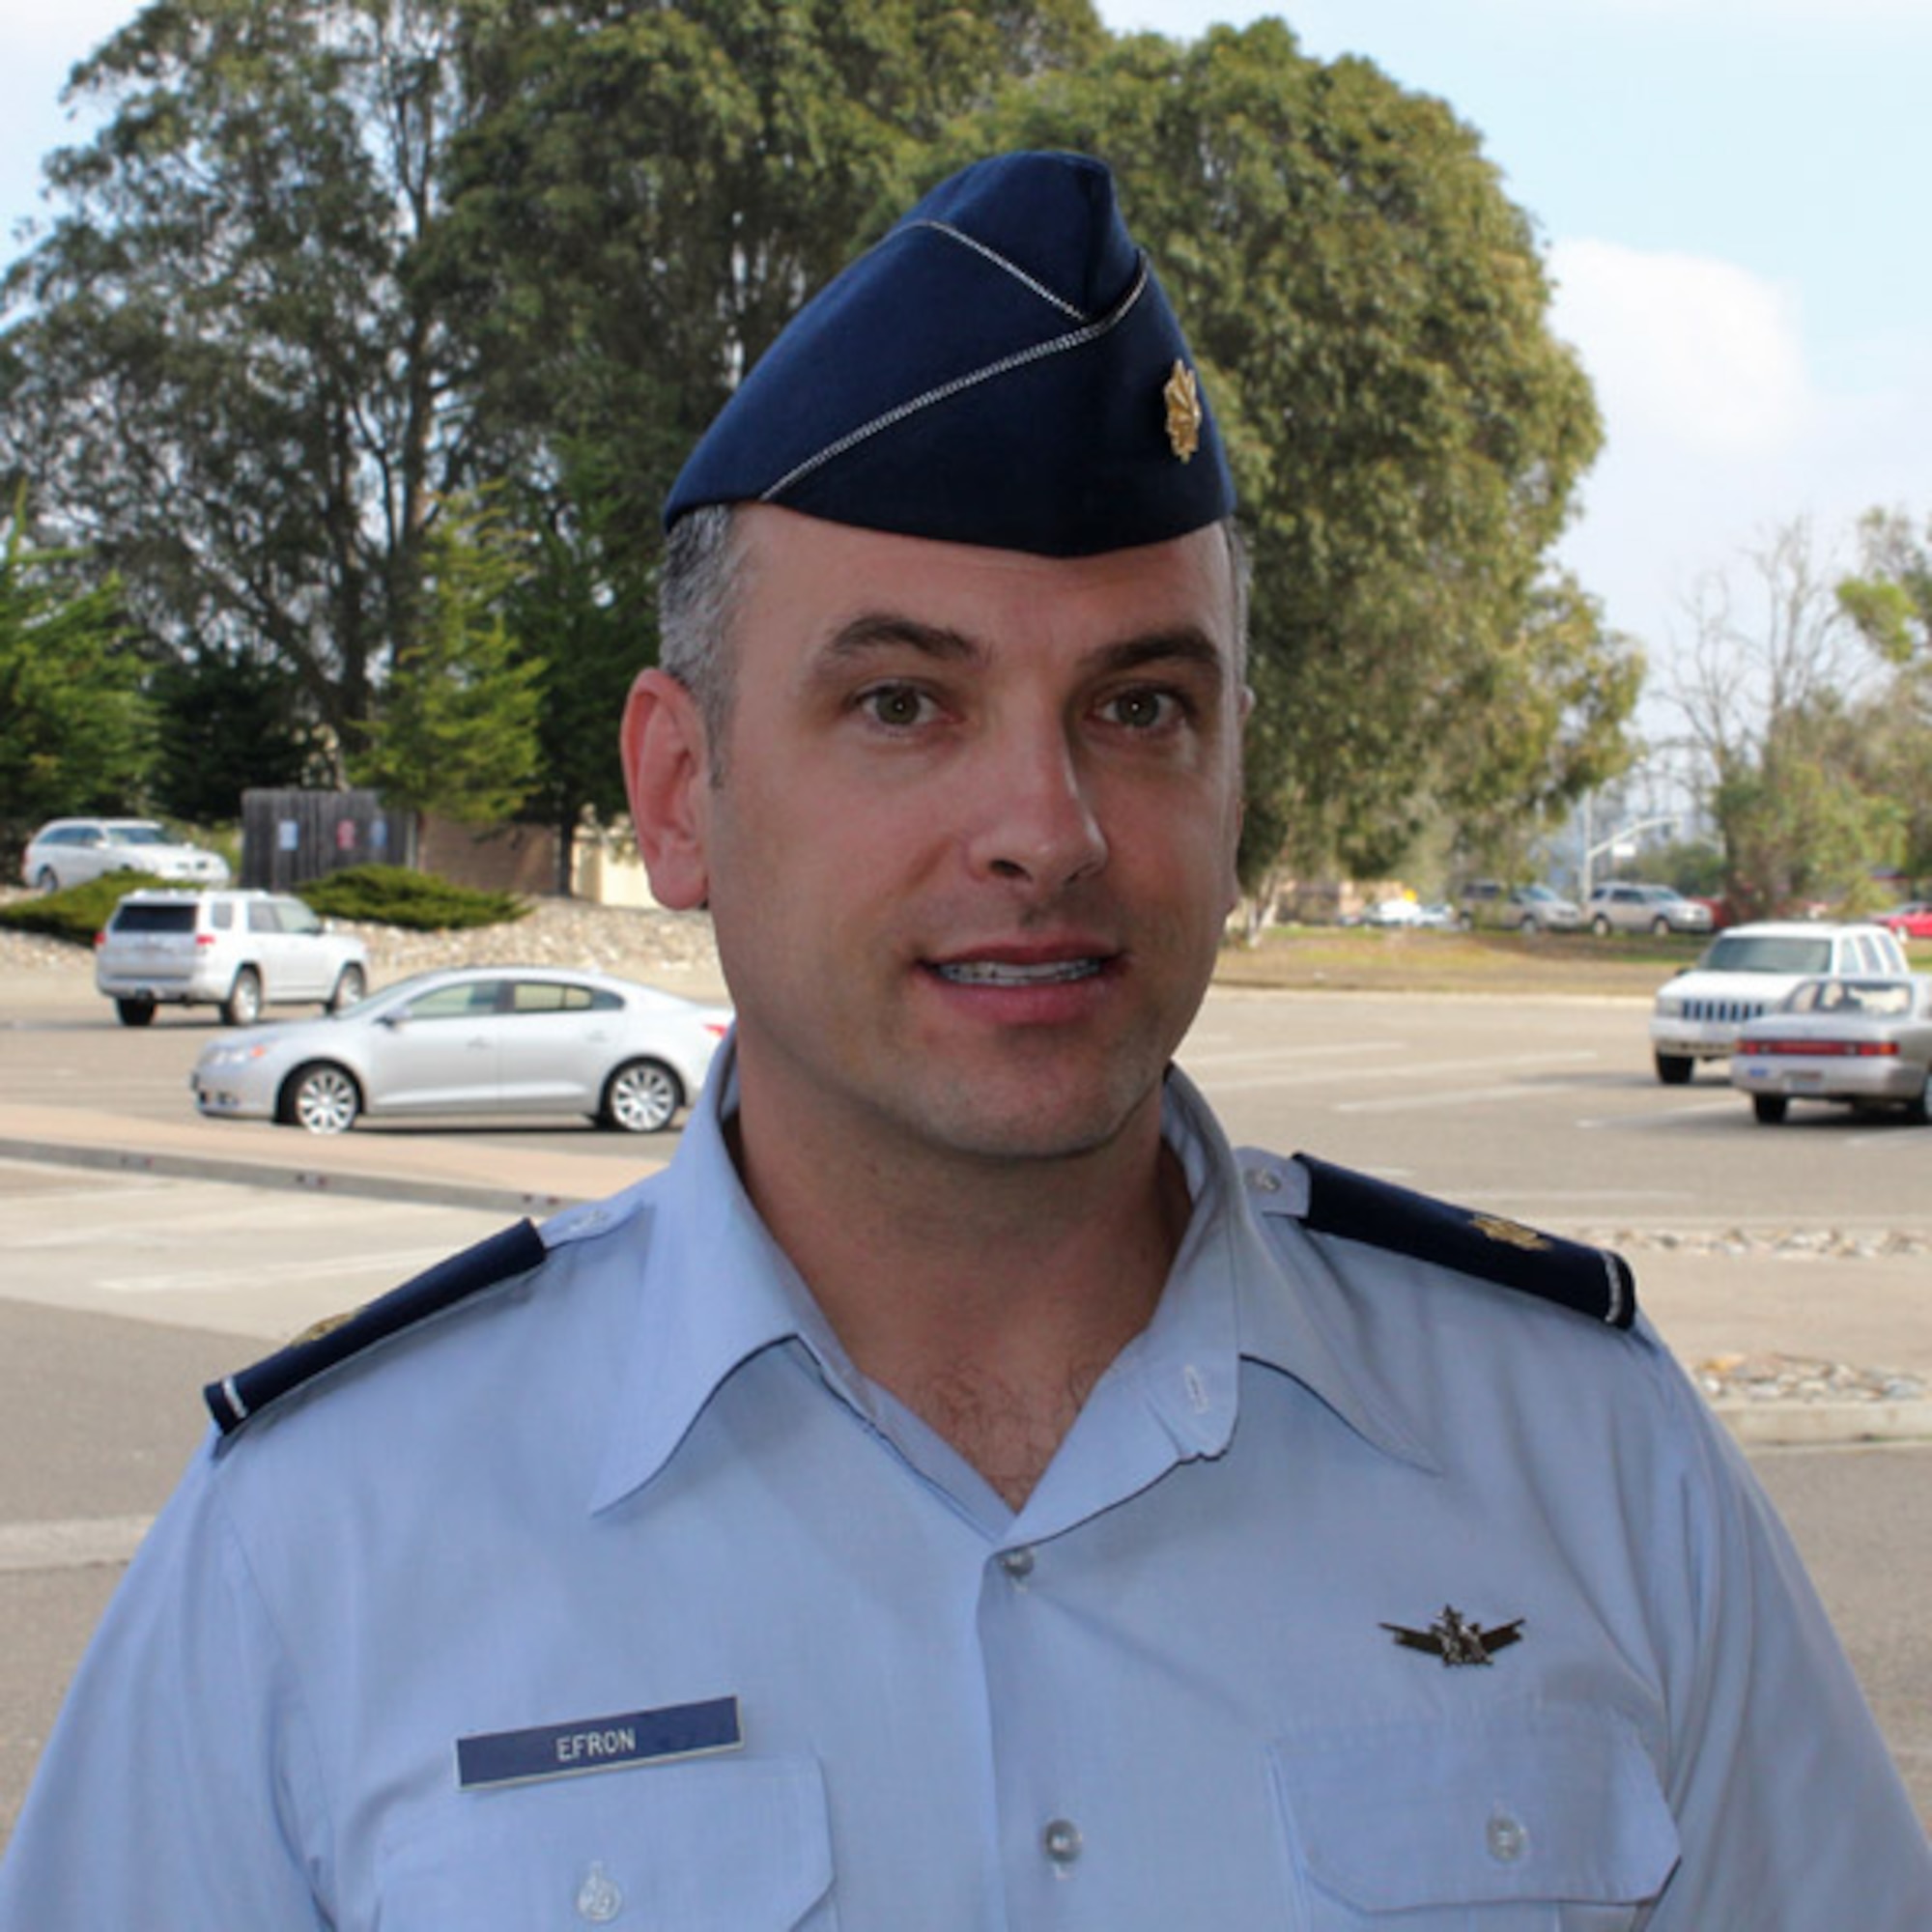 VANDENBERG AIR FORCE BASE, Calif. --  Maj. Jeff Efron, 14th Air Force member: Q: What are you most thankful for this year? A: "My son's health." Q: Favorite part of your holiday meal? A: "Oyster bar, probably haven't heard that one yet." Q: Did you do any Black Friday shopping? A: "I just hit some outlets on my trip back from visiting family in Arizona." (U.S. Air Force photo/Michael Peterson)